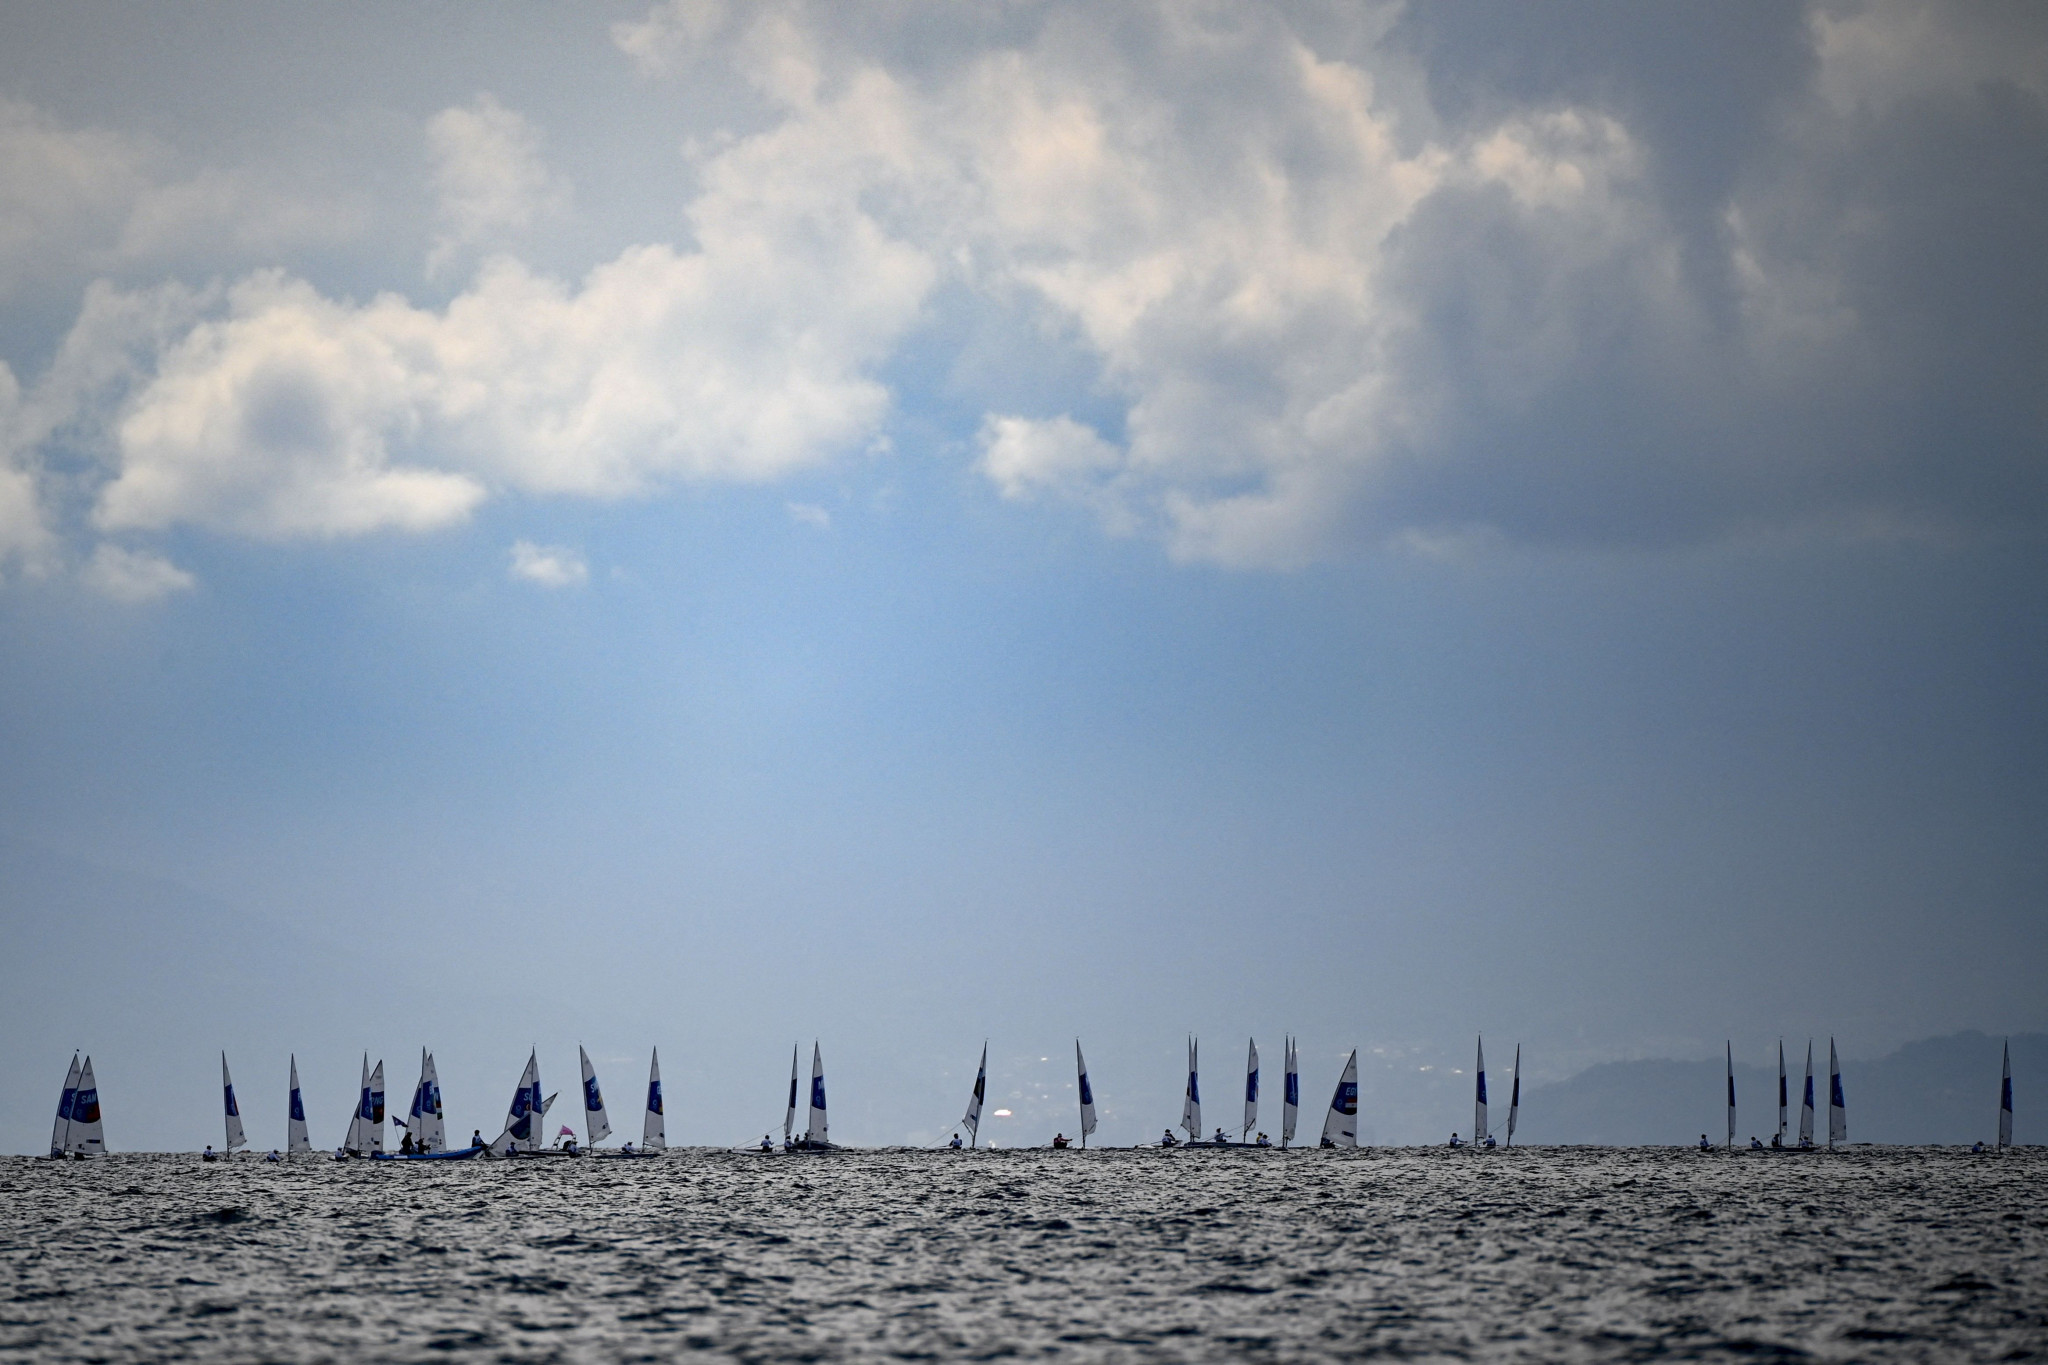 Sailors were able to compete on day two following yesterday's postponement ©Getty Images